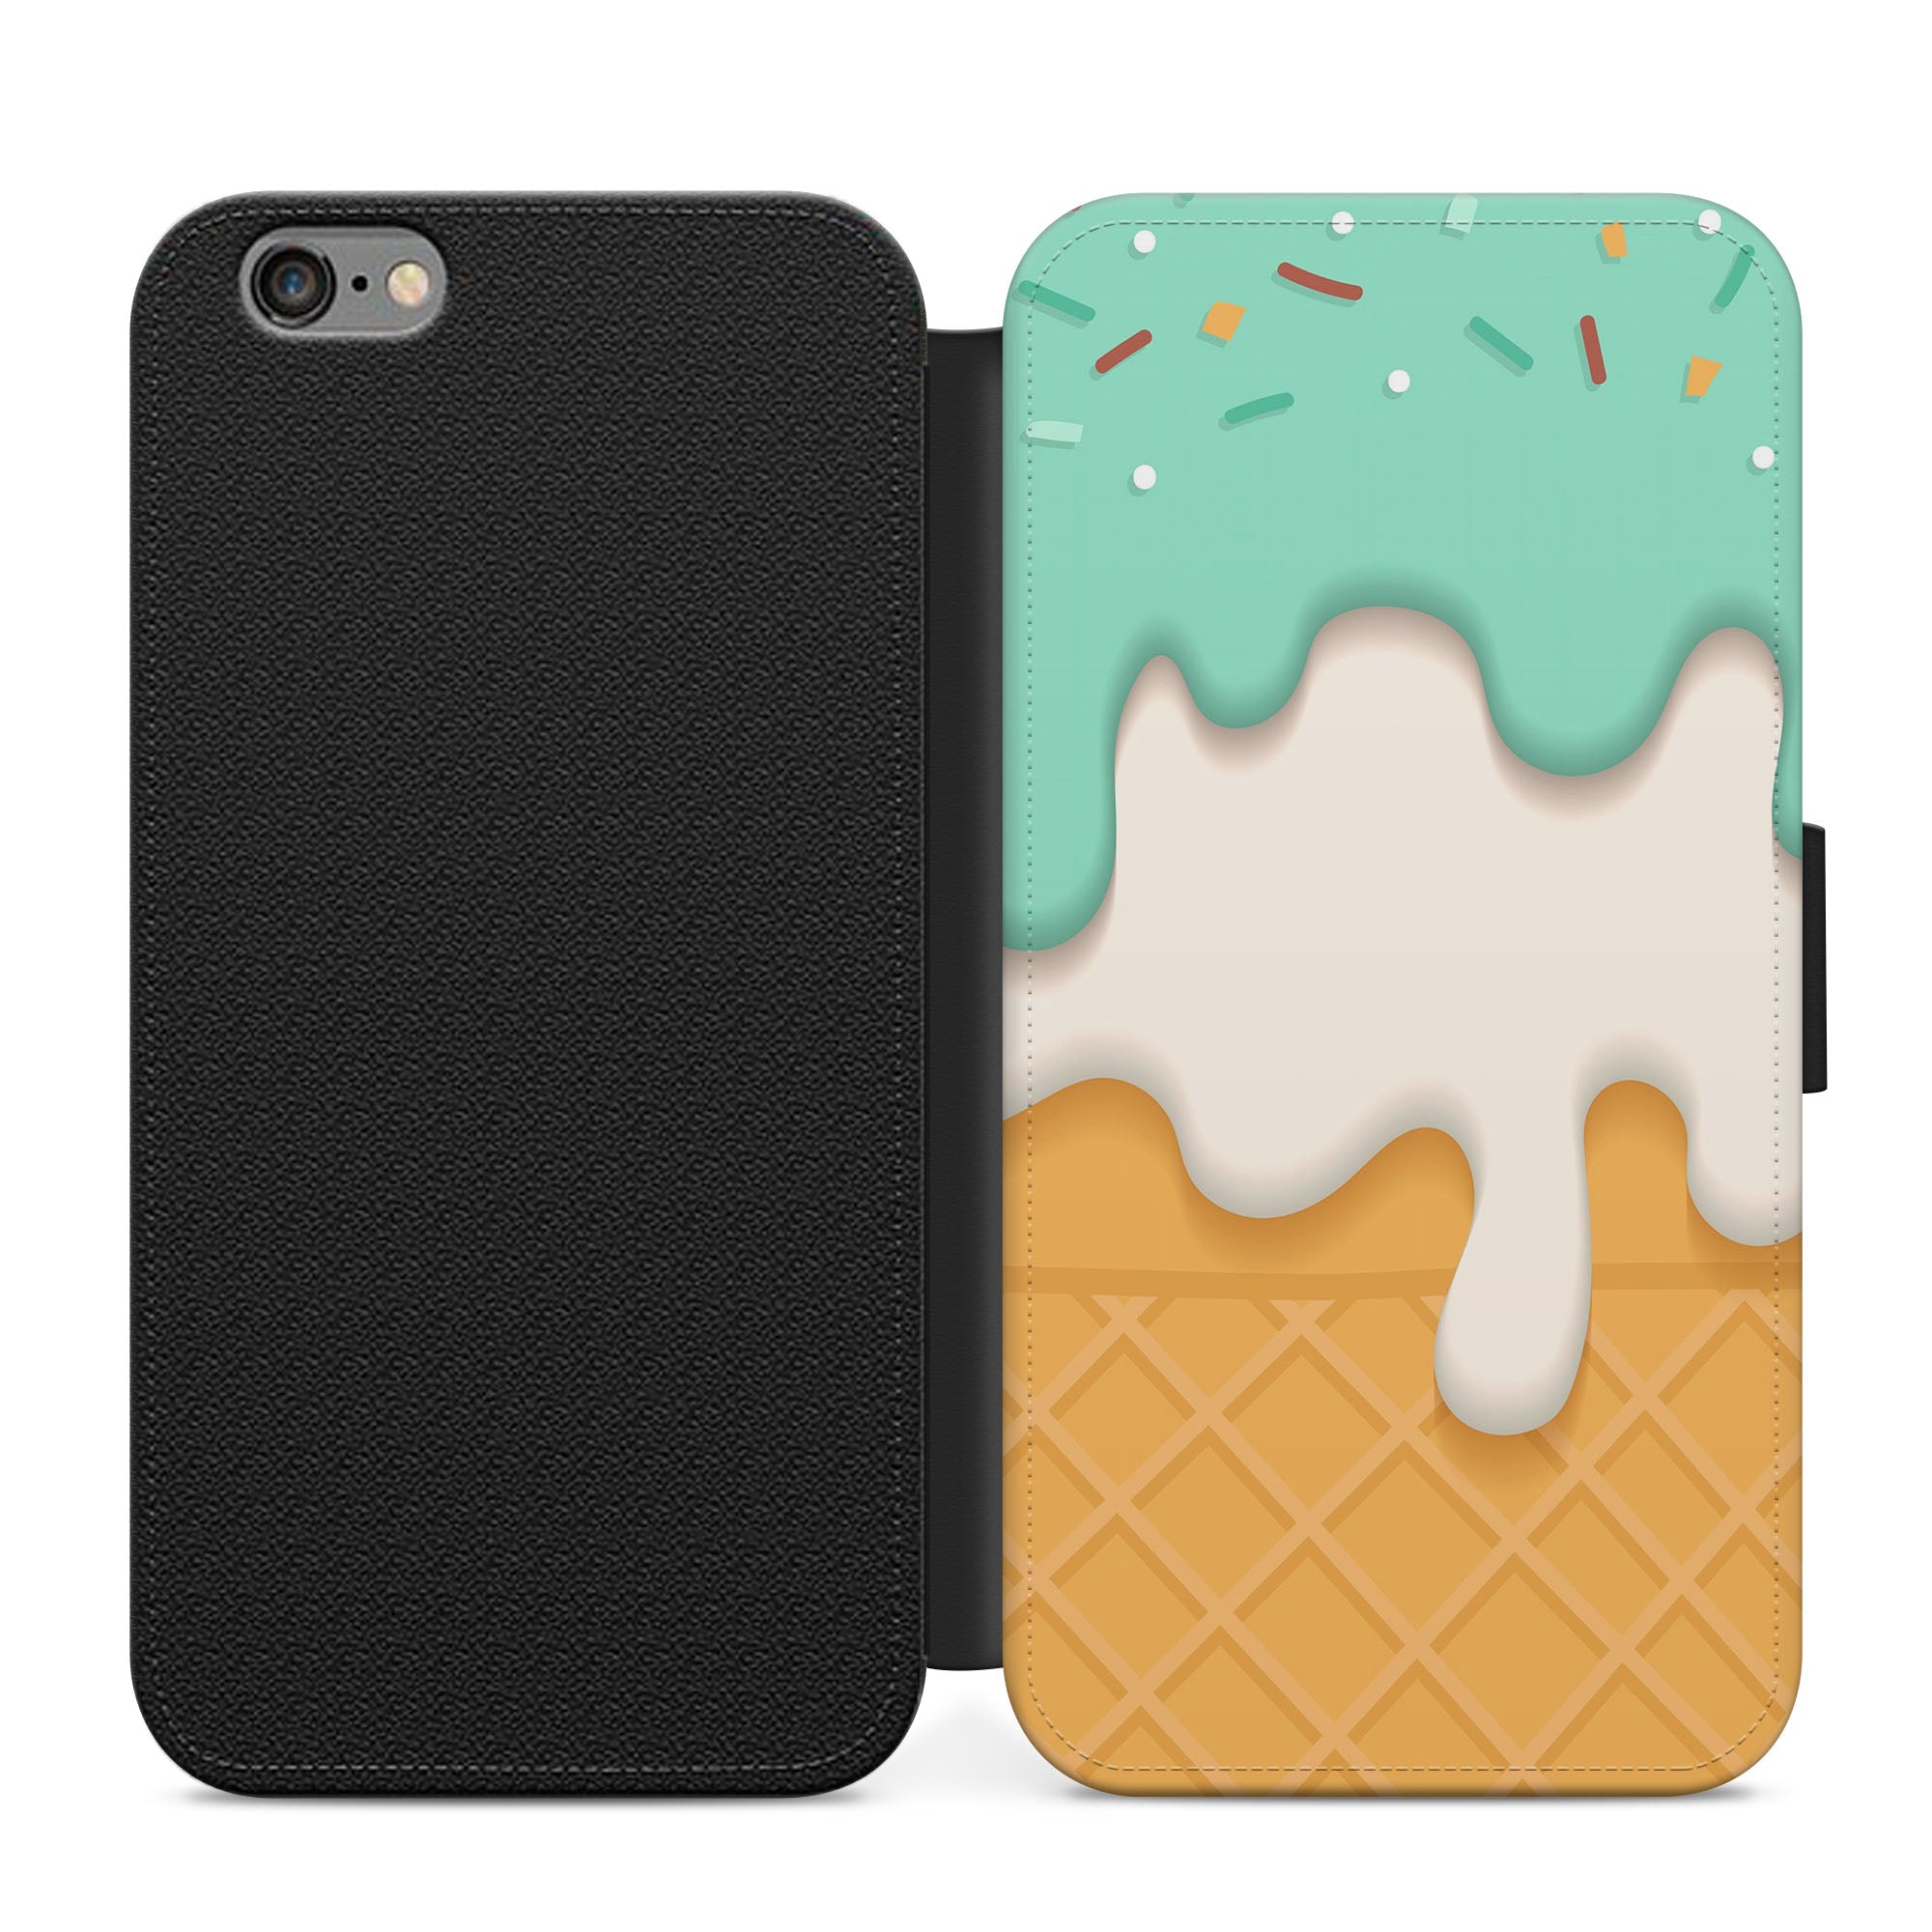 Ice Cream Cone Faux Leather Flip Case Wallet for iPhone / Samsung